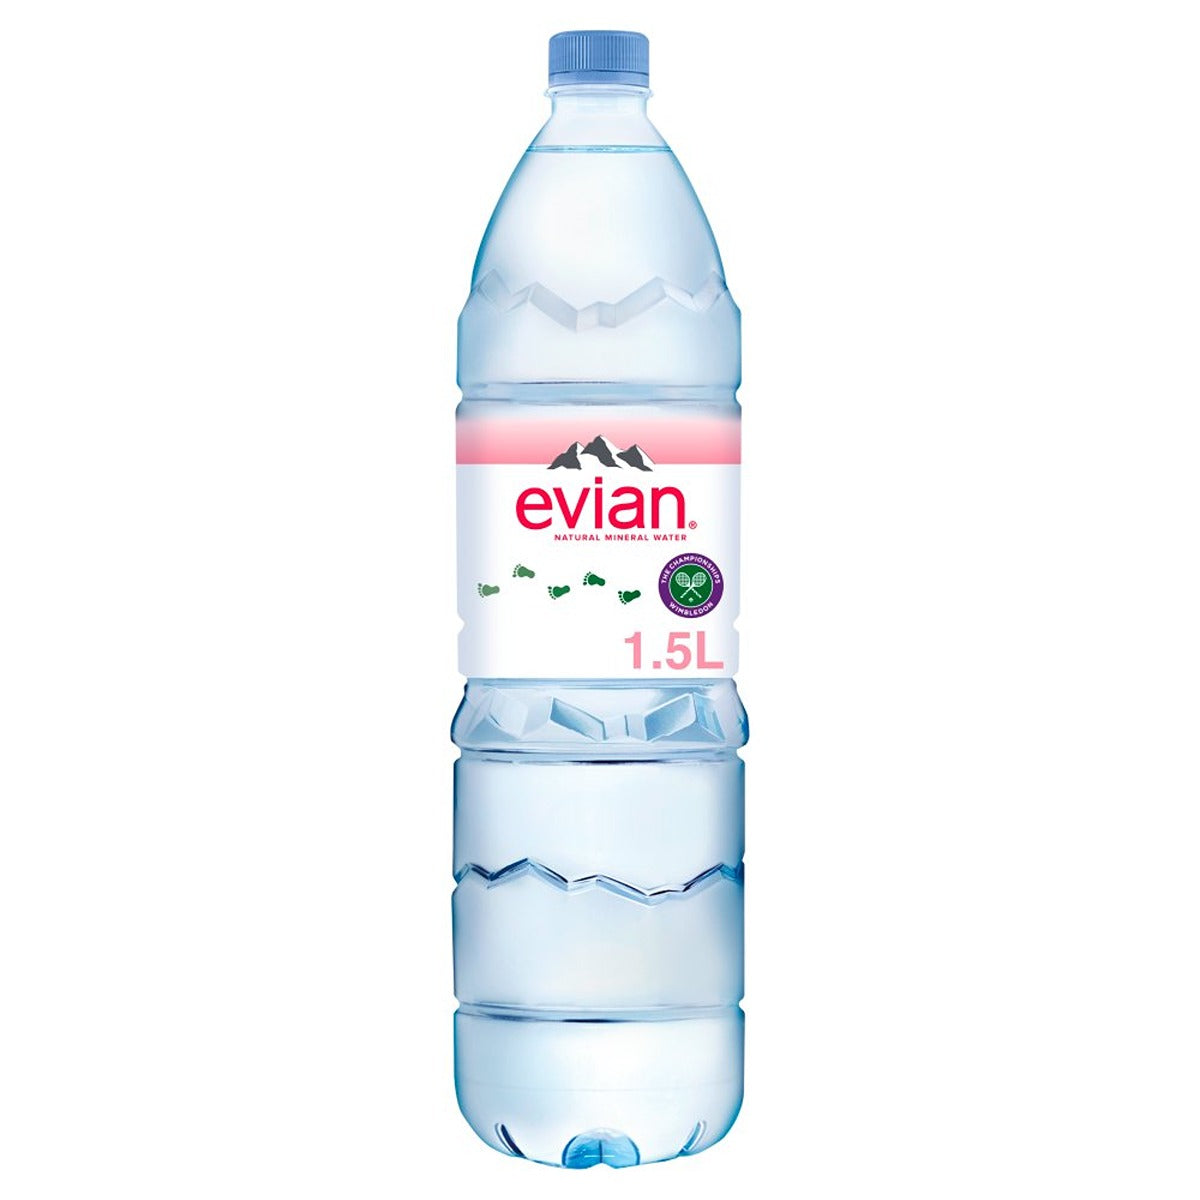 A bottle of Evian - Still Water - 1.5L on a white background.